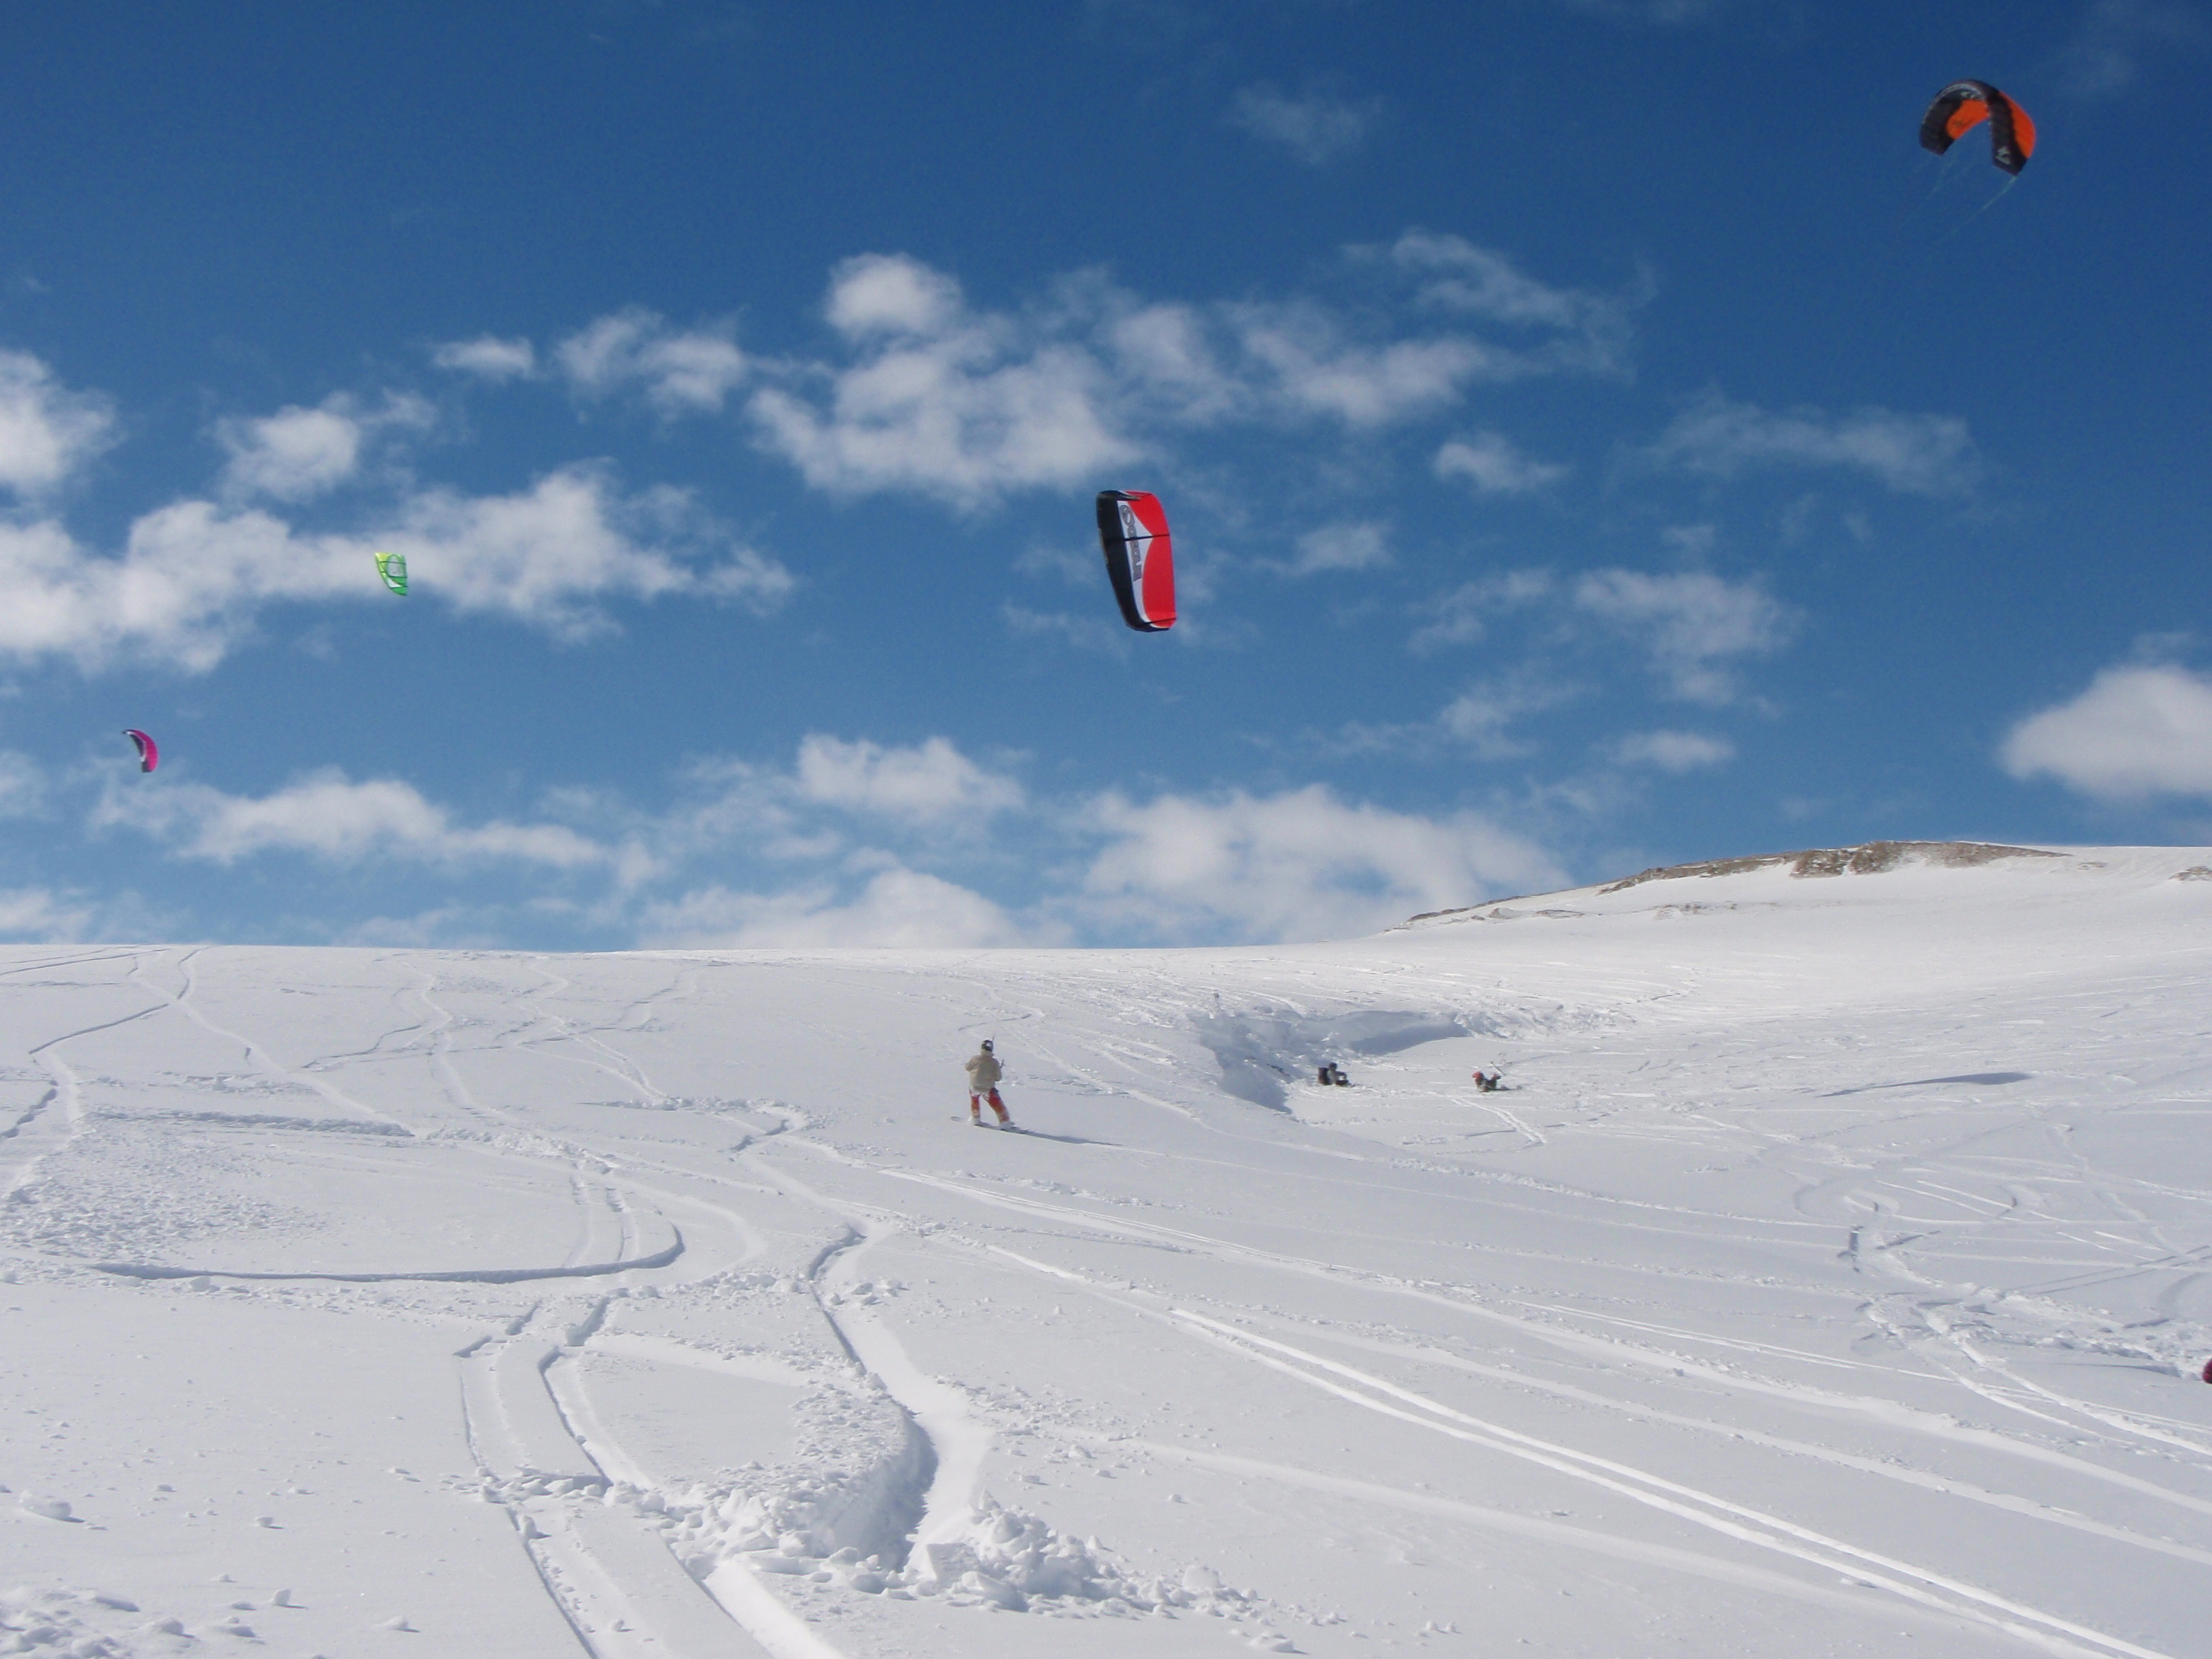 snow kiting at snow farm is pretty awesome